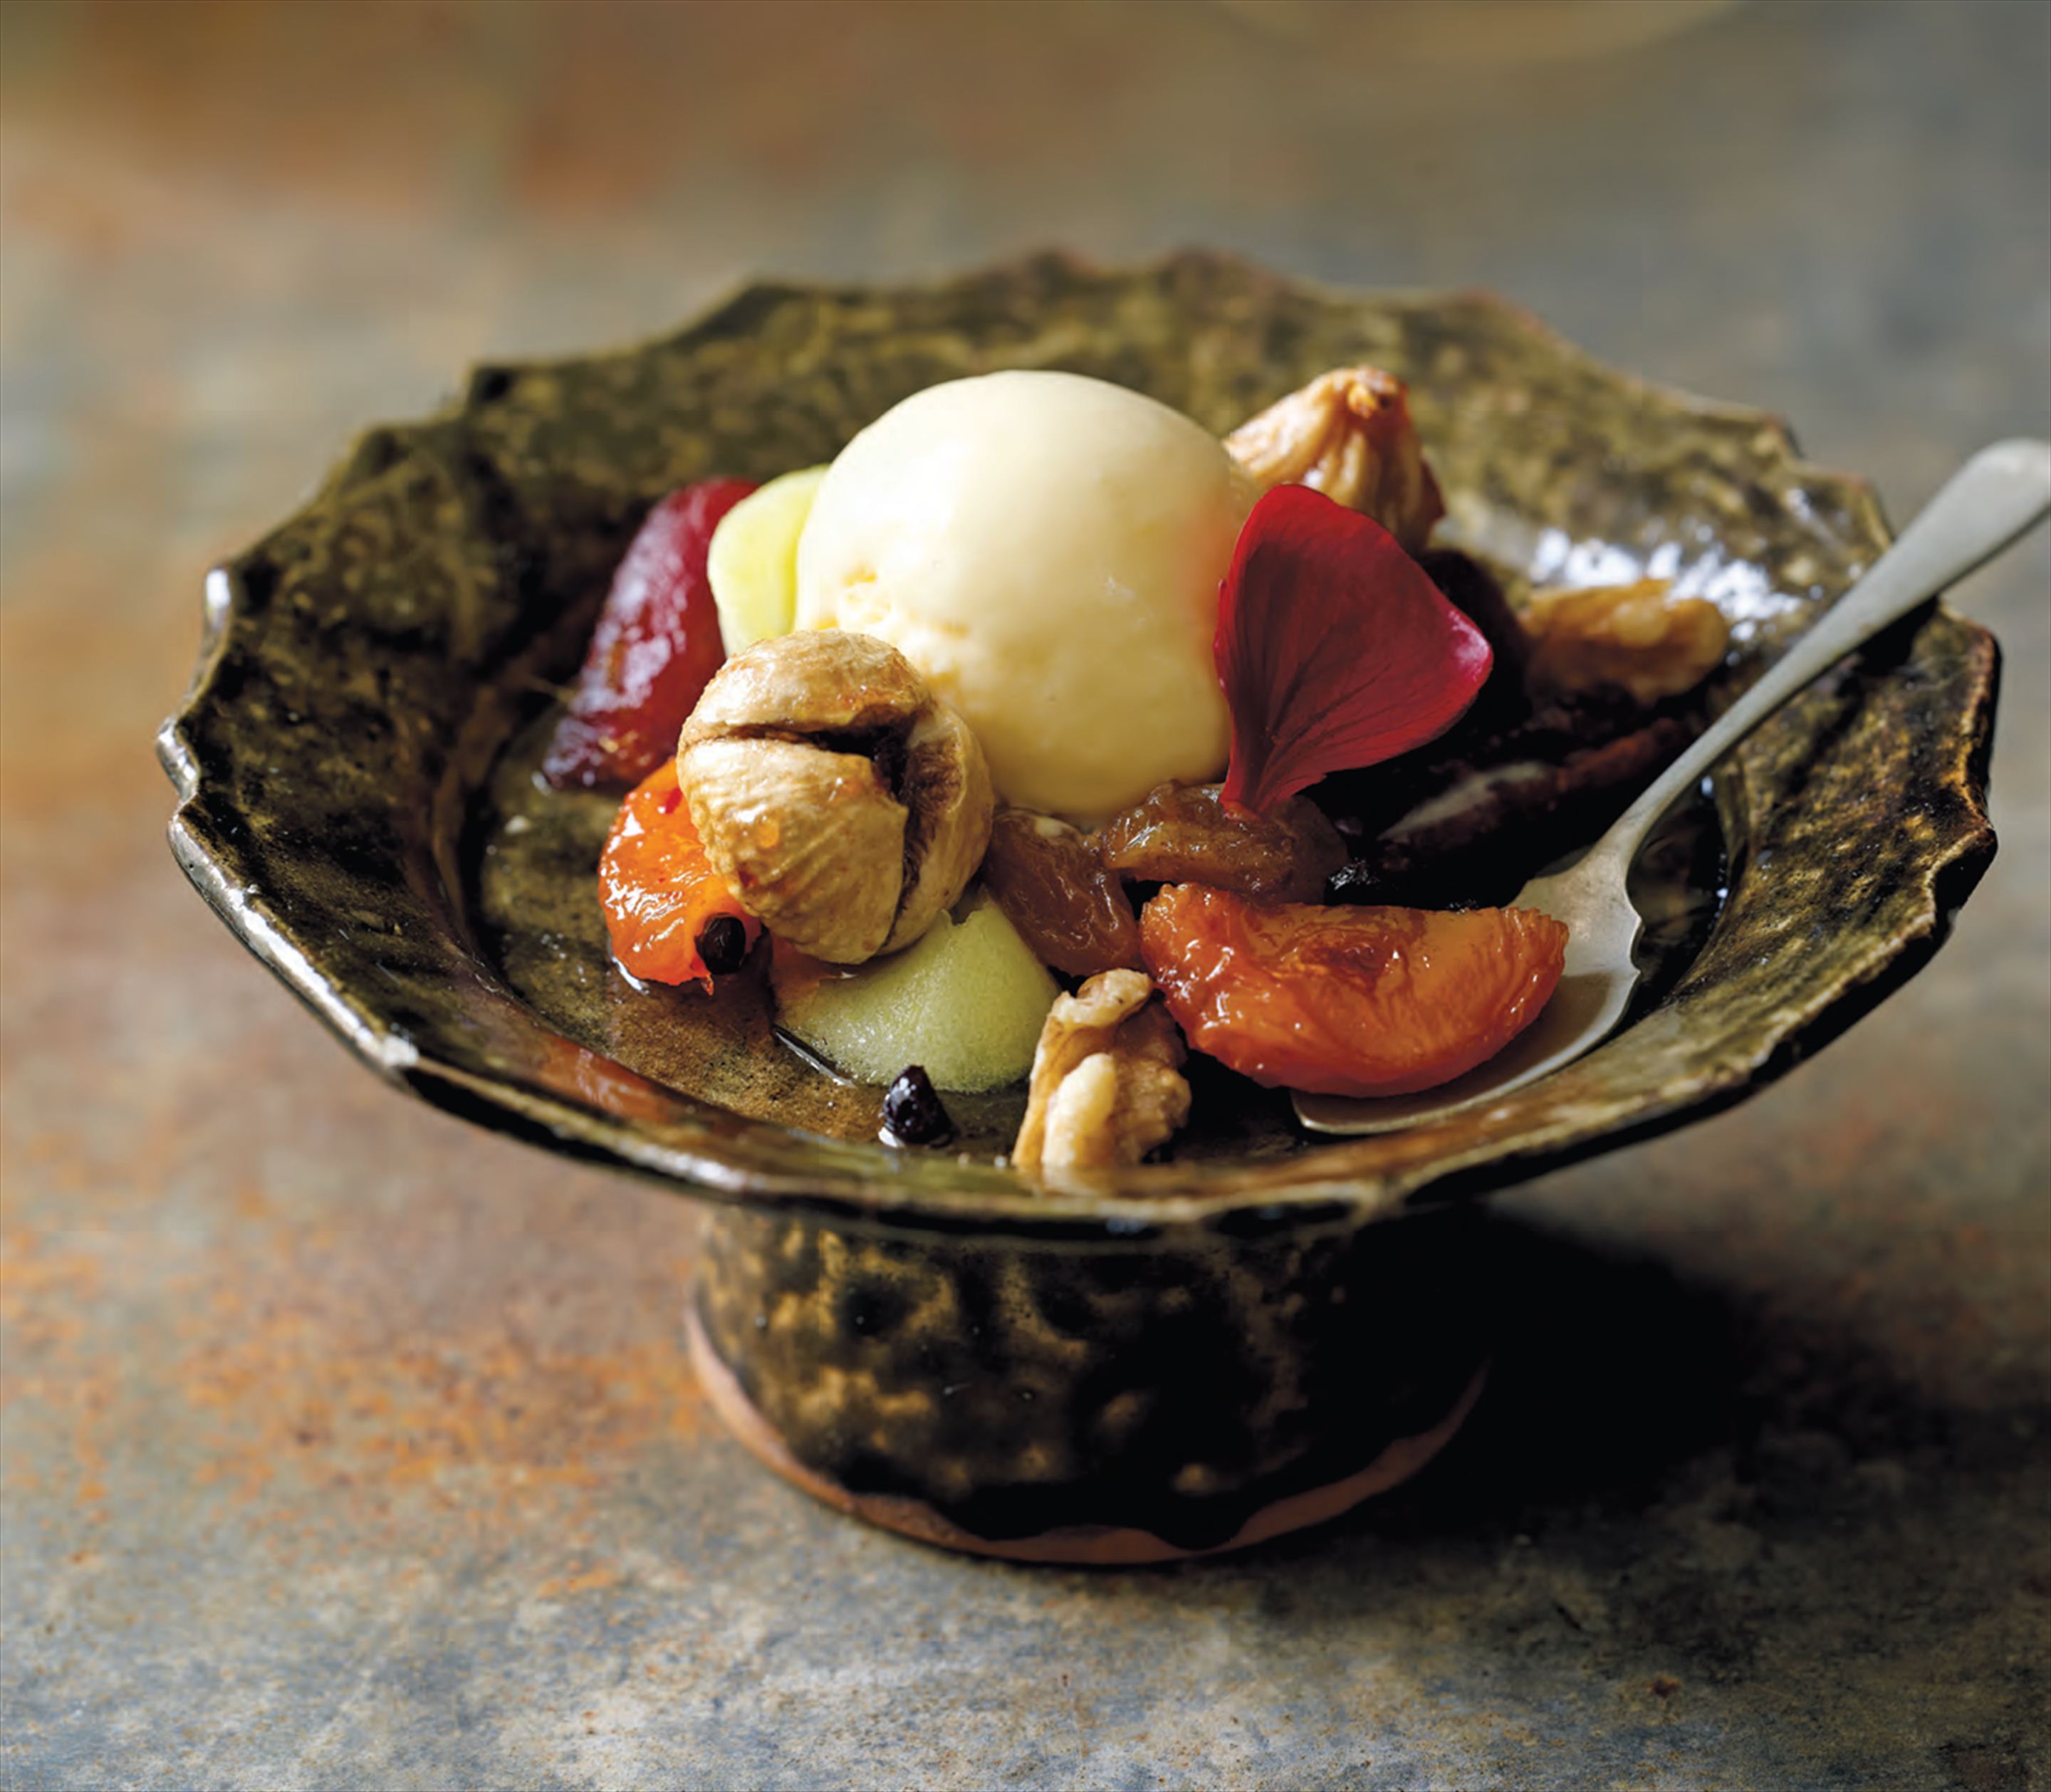 Buttermilk ice-cream with dried fruit compote